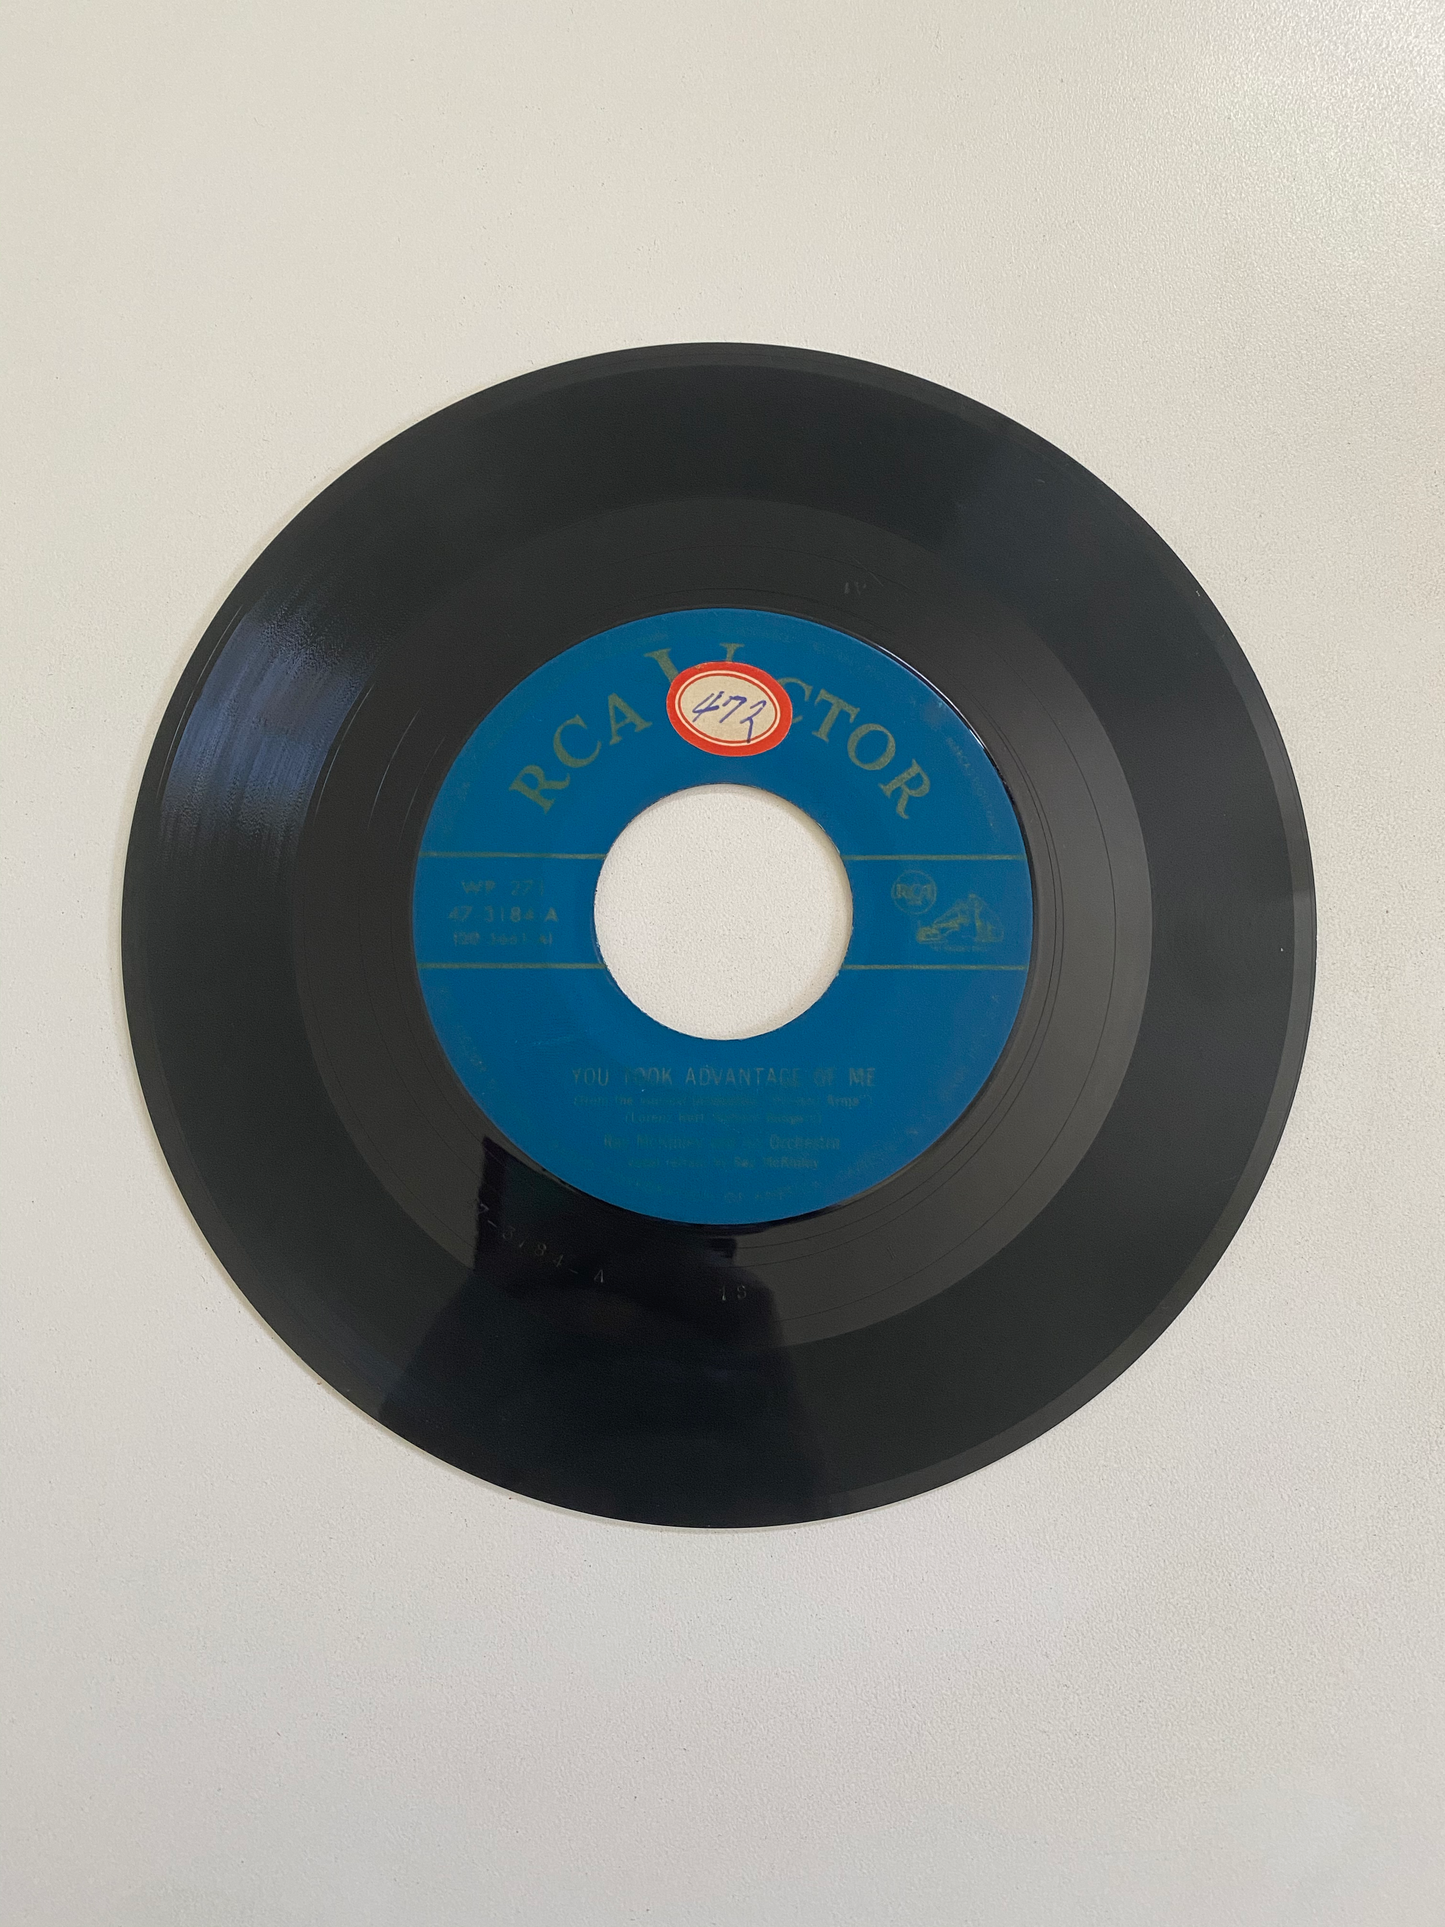 Ray McKinley and his Orchestra - You Took Advantage of Me | 45 The Vintedge Co.